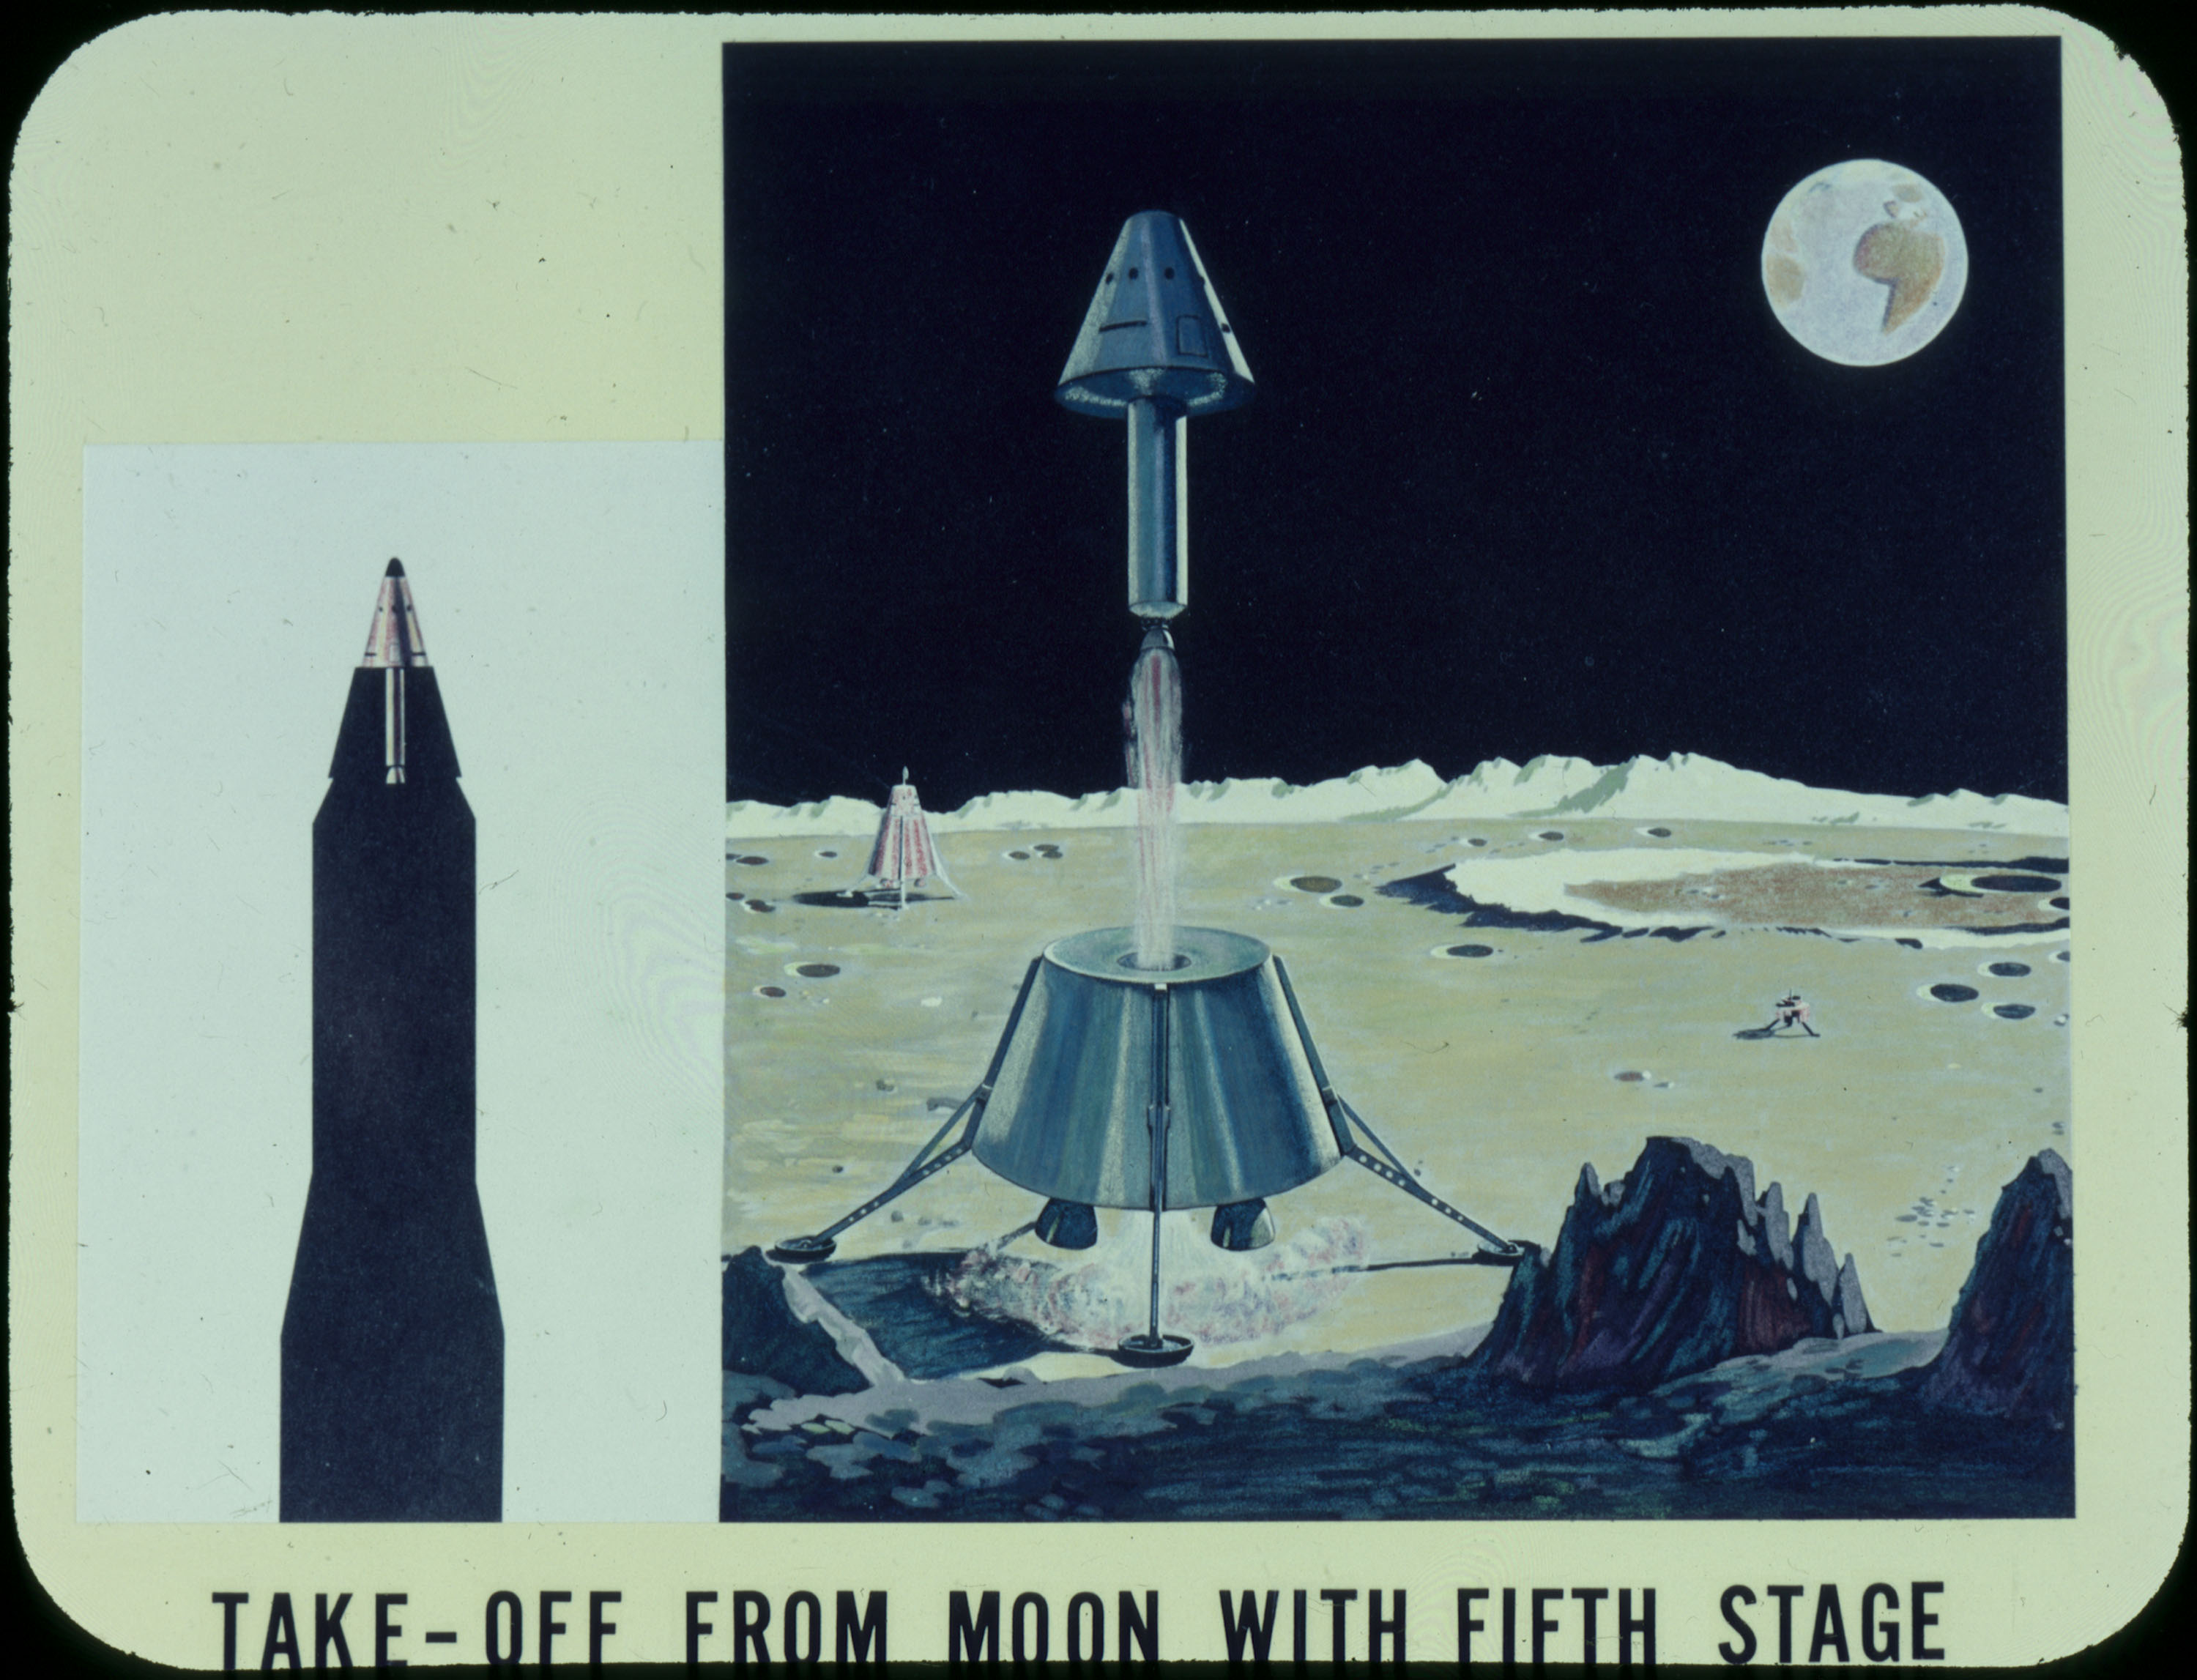 Artist concept of lunar module lifting off from the surface of the moon